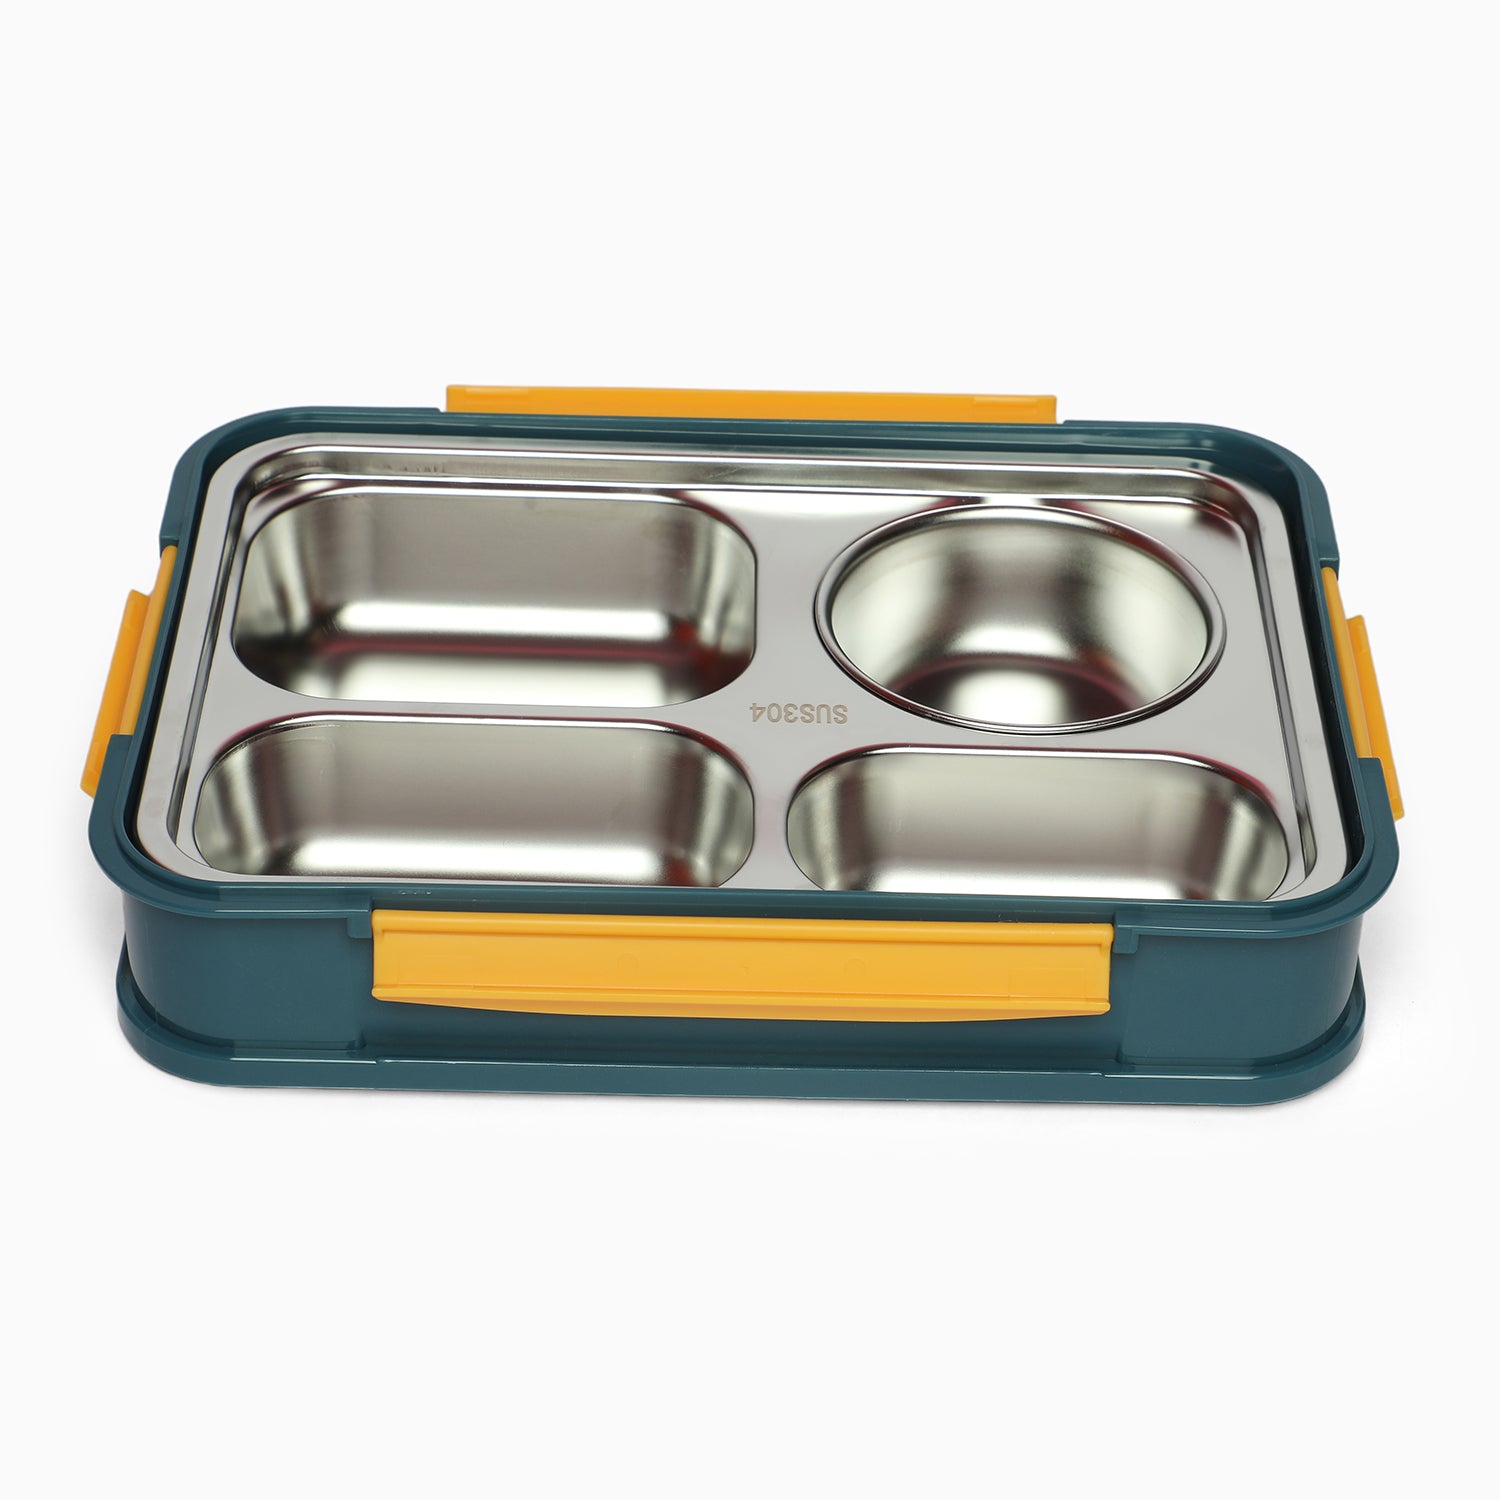 Food stainless steel 4 compartment lunchbox -1000 ml (blue)